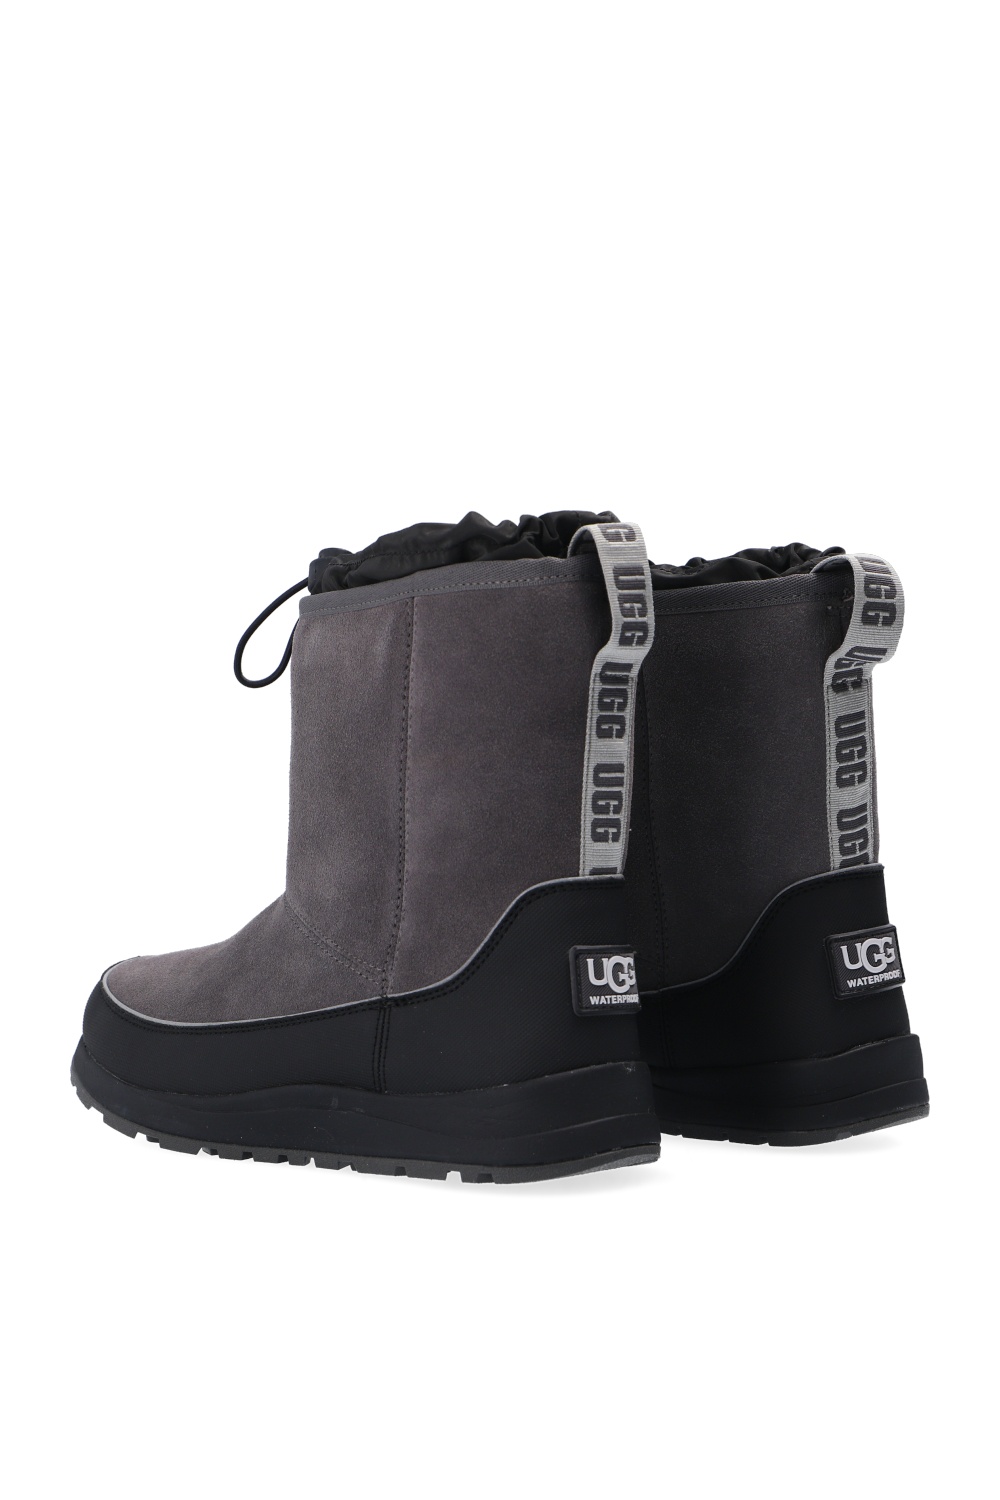 ugg toddler snow boots